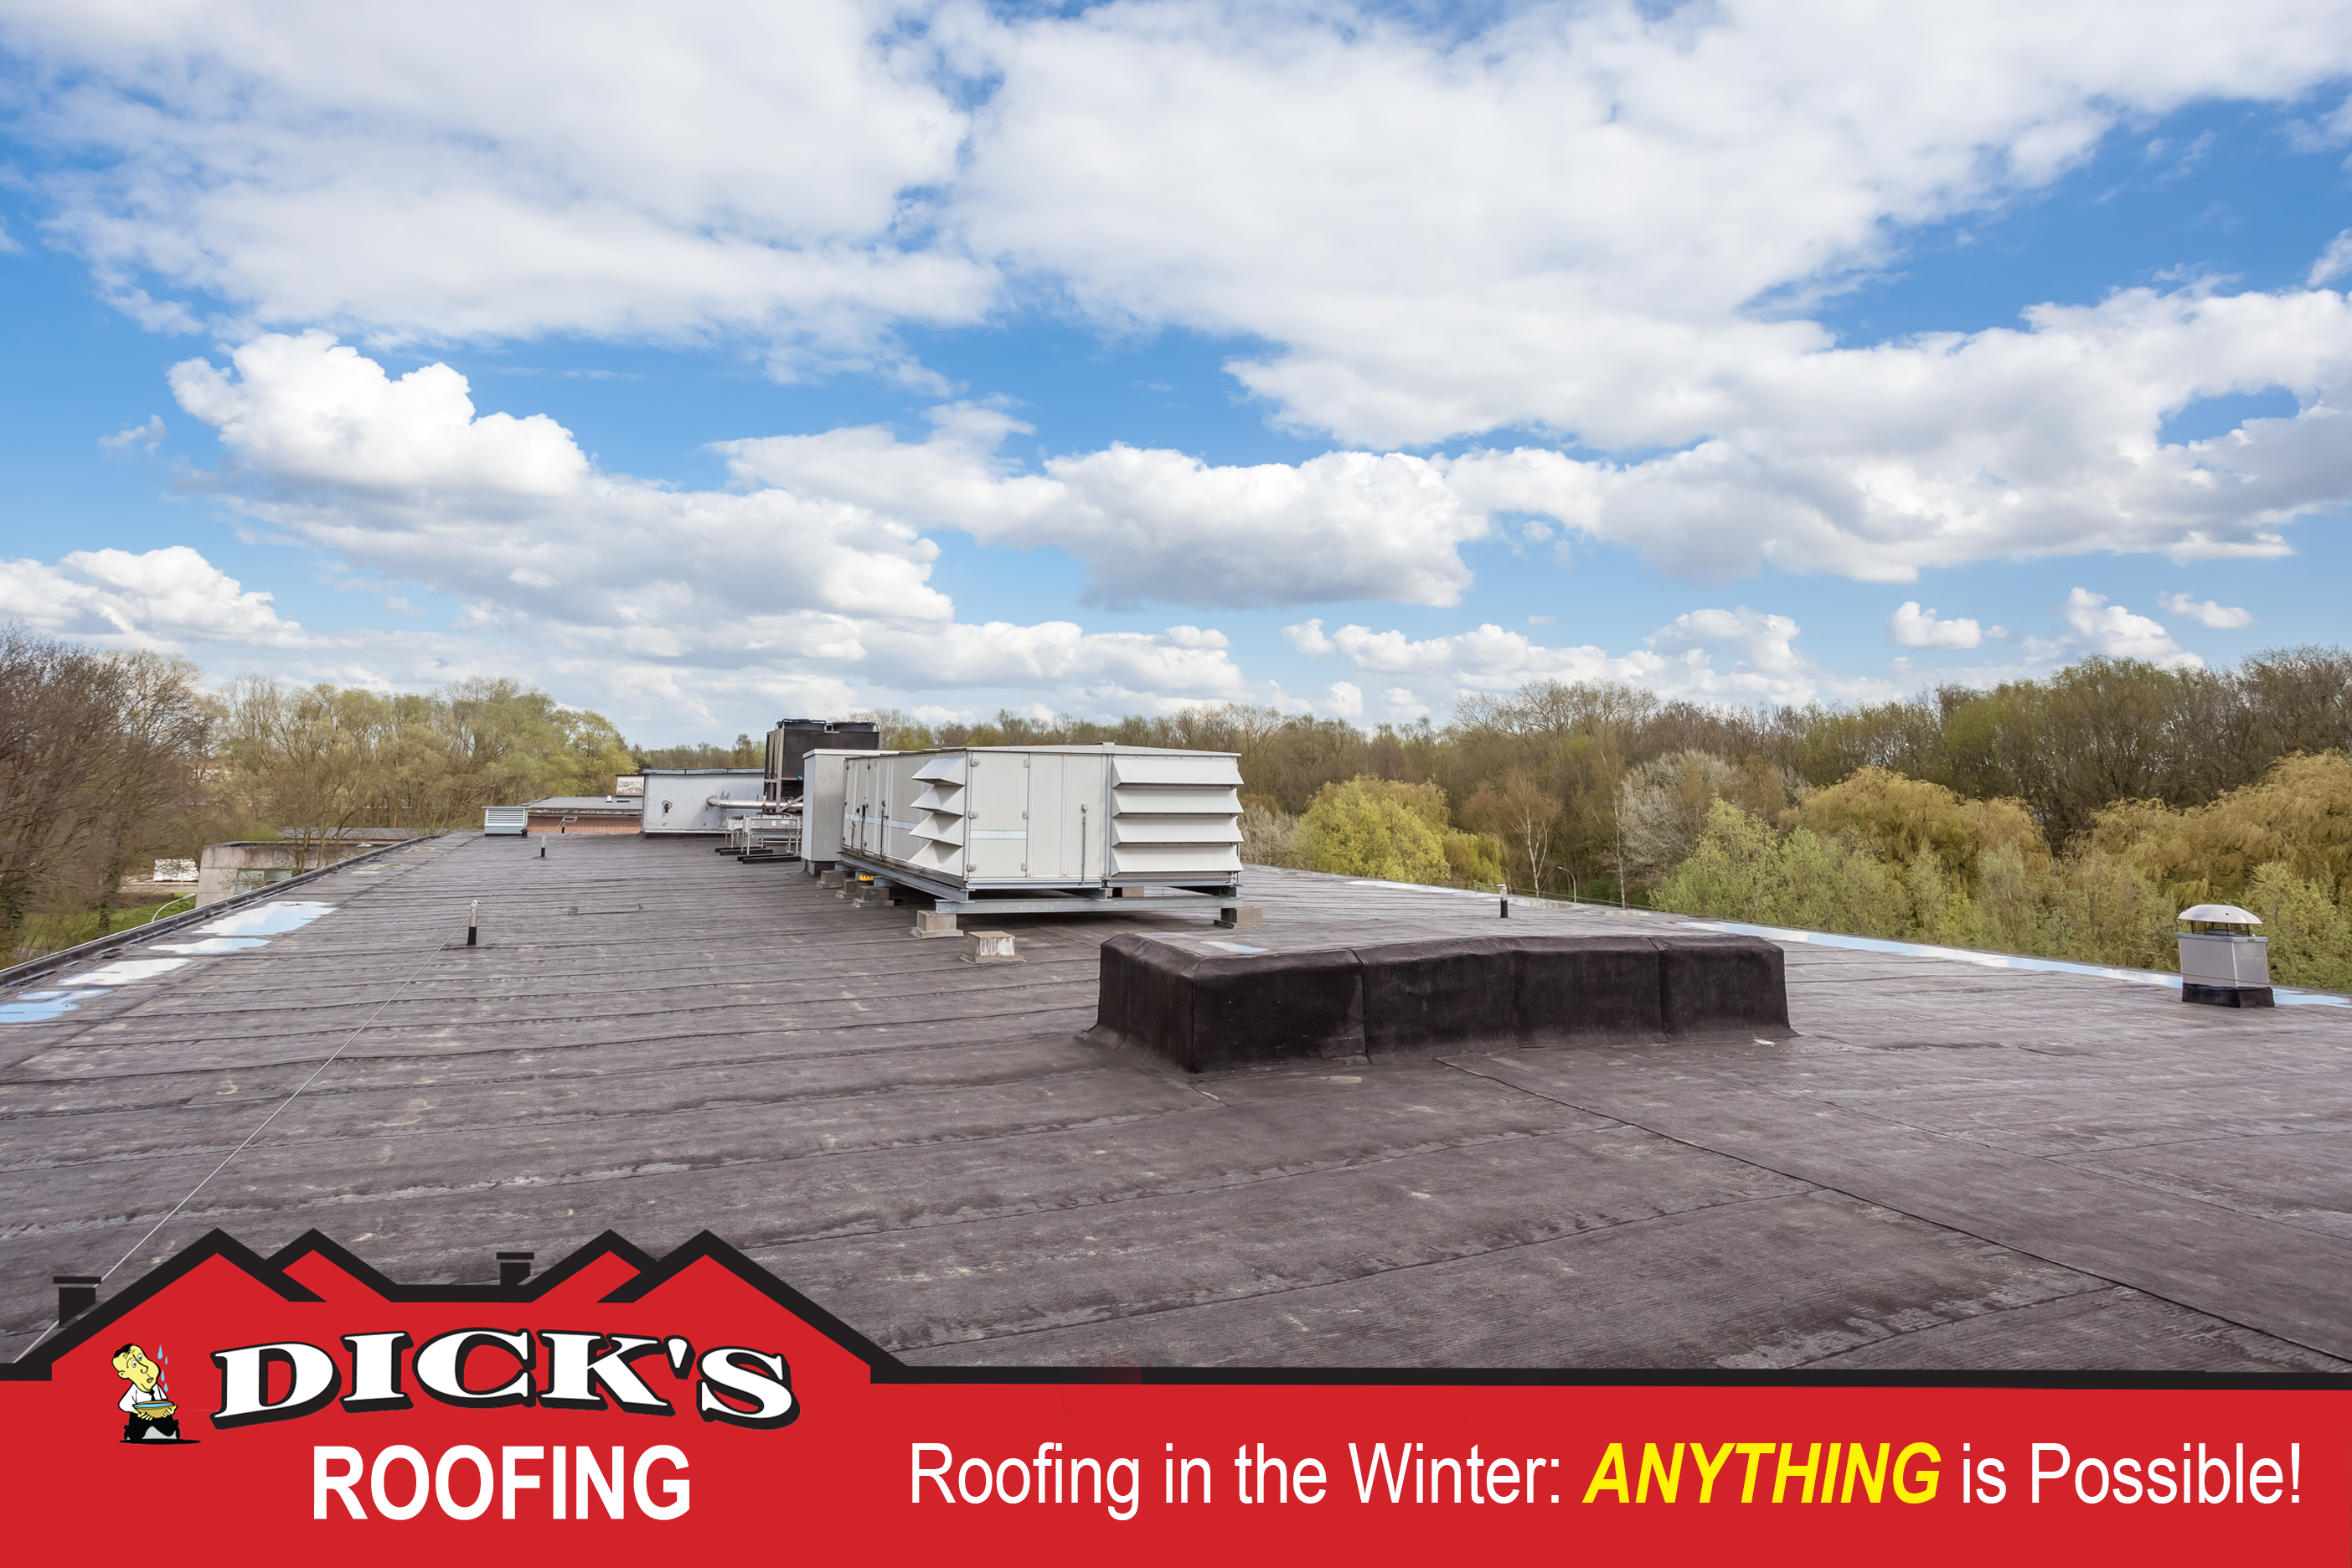 Roofing in the Winter | Dick's Roofing